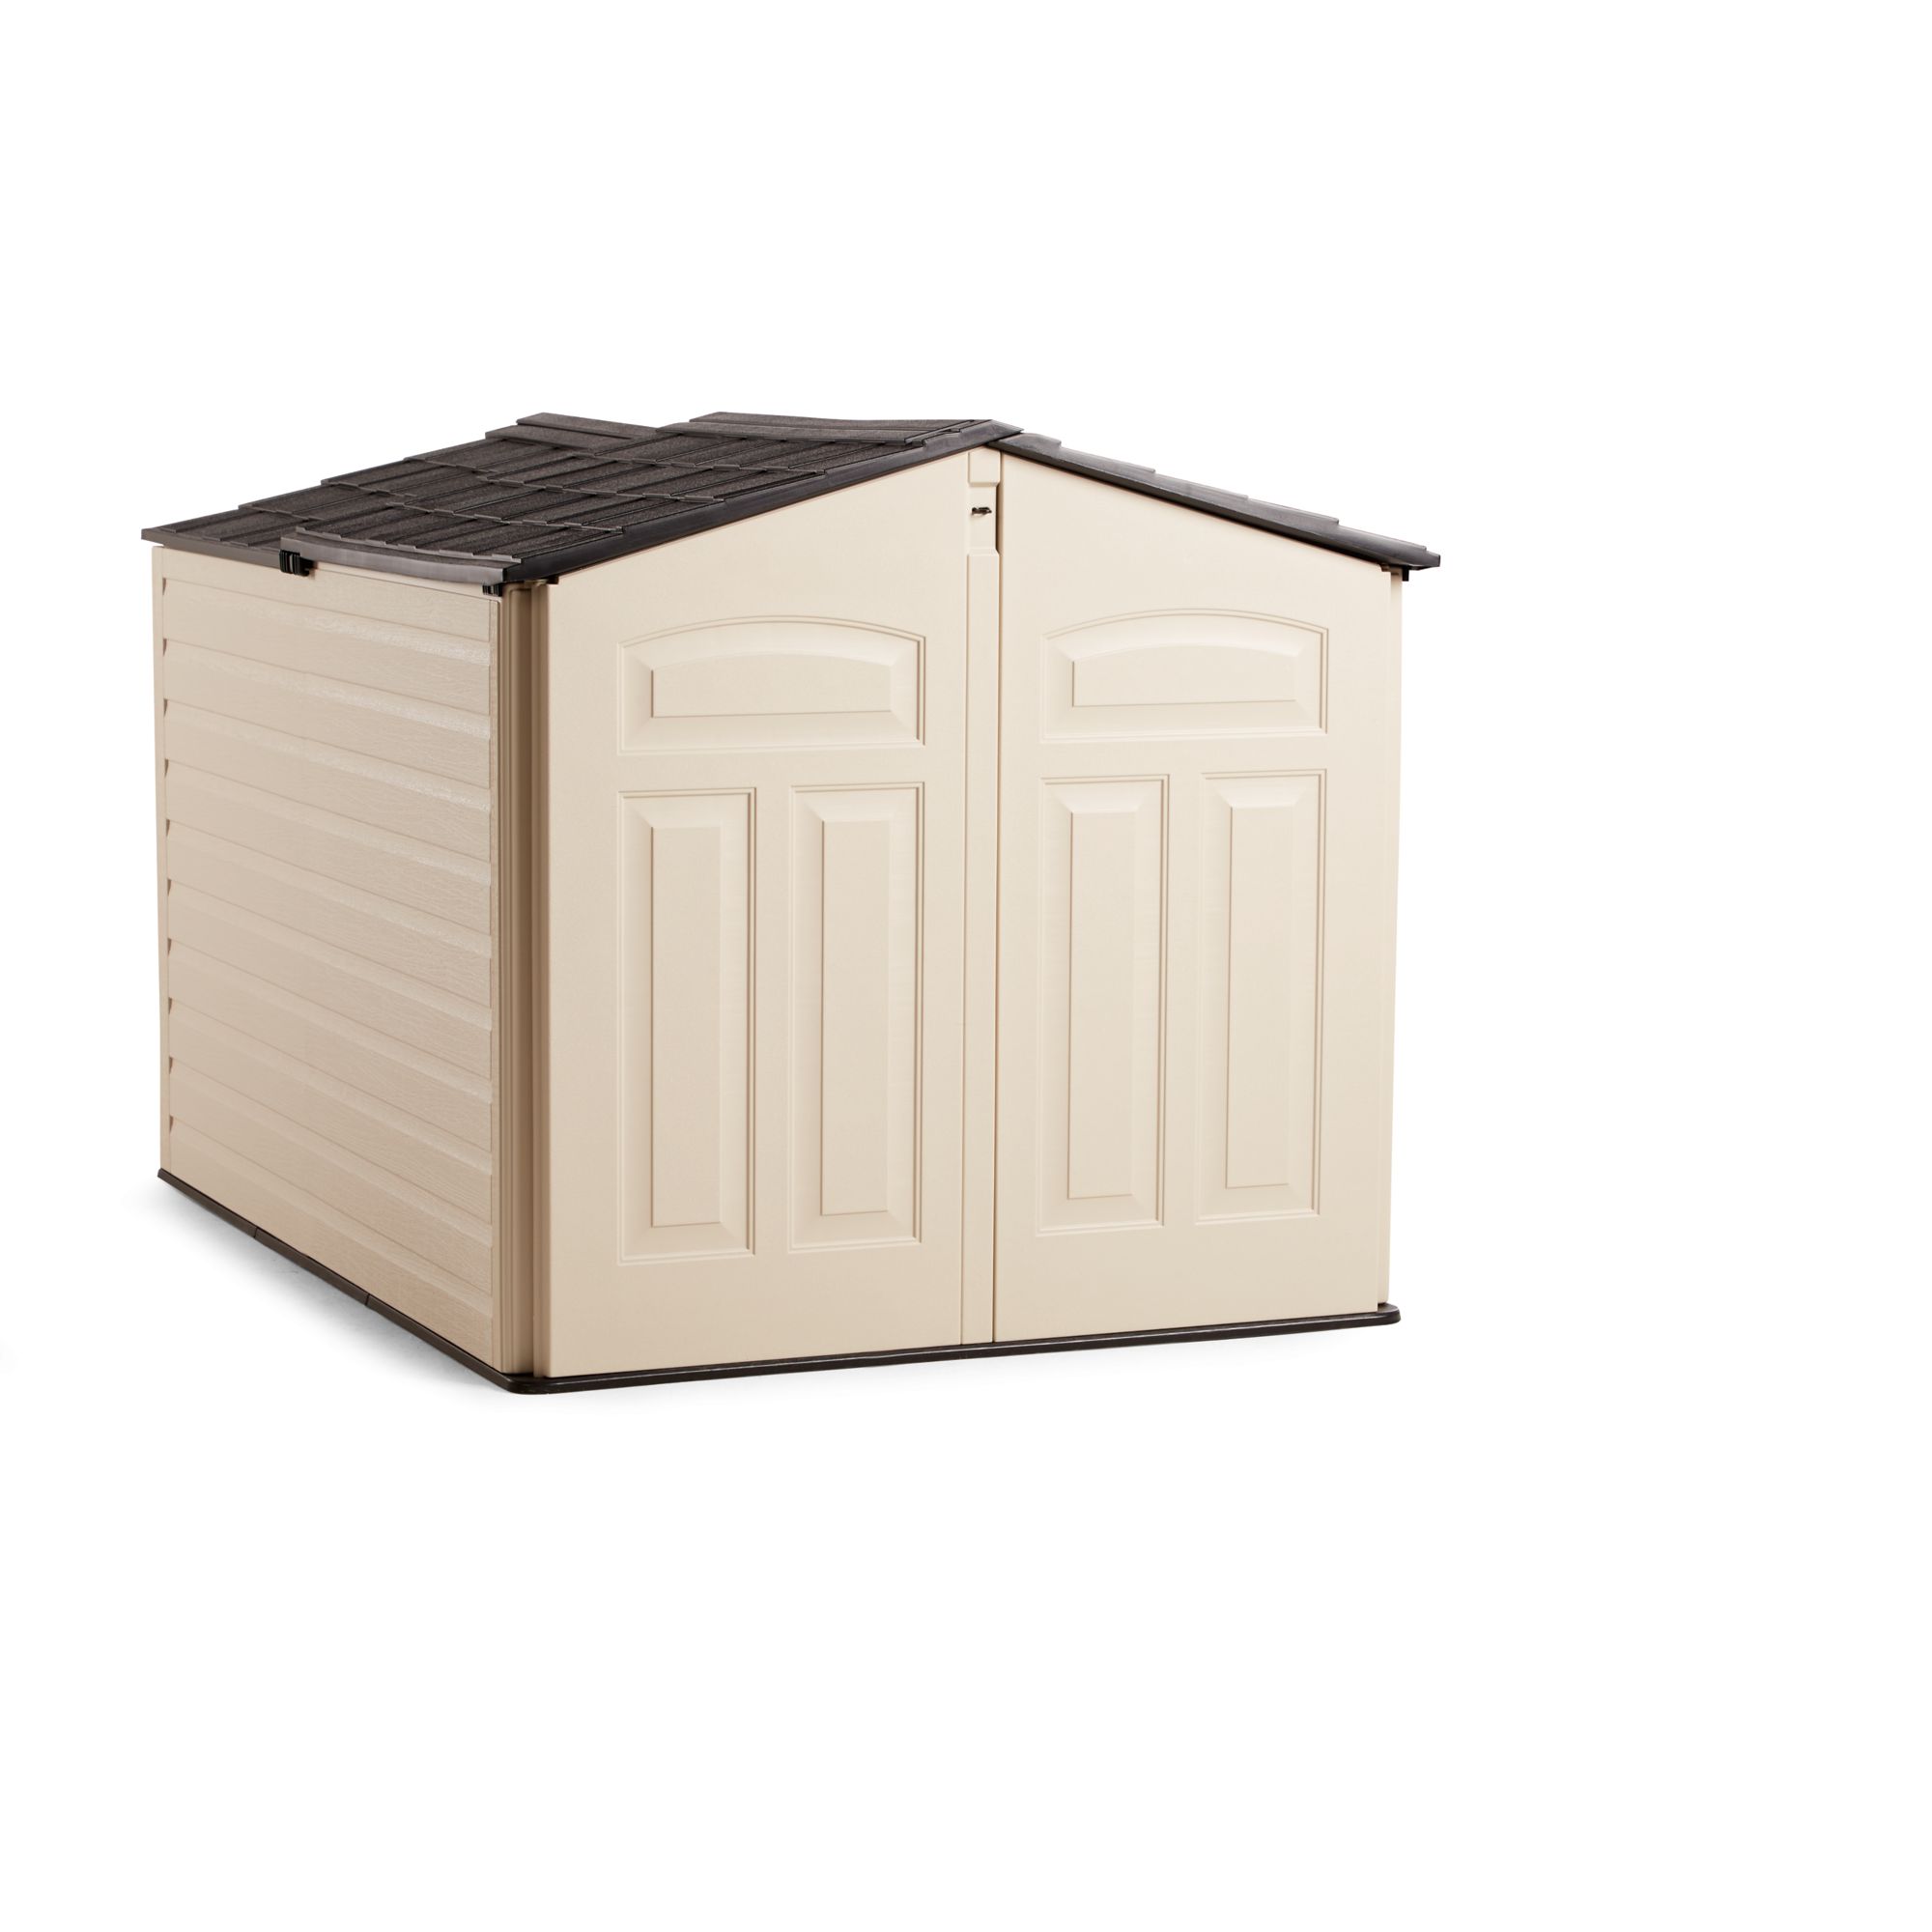 A collection of reviews of the Rubbermaid horizontal storage shed